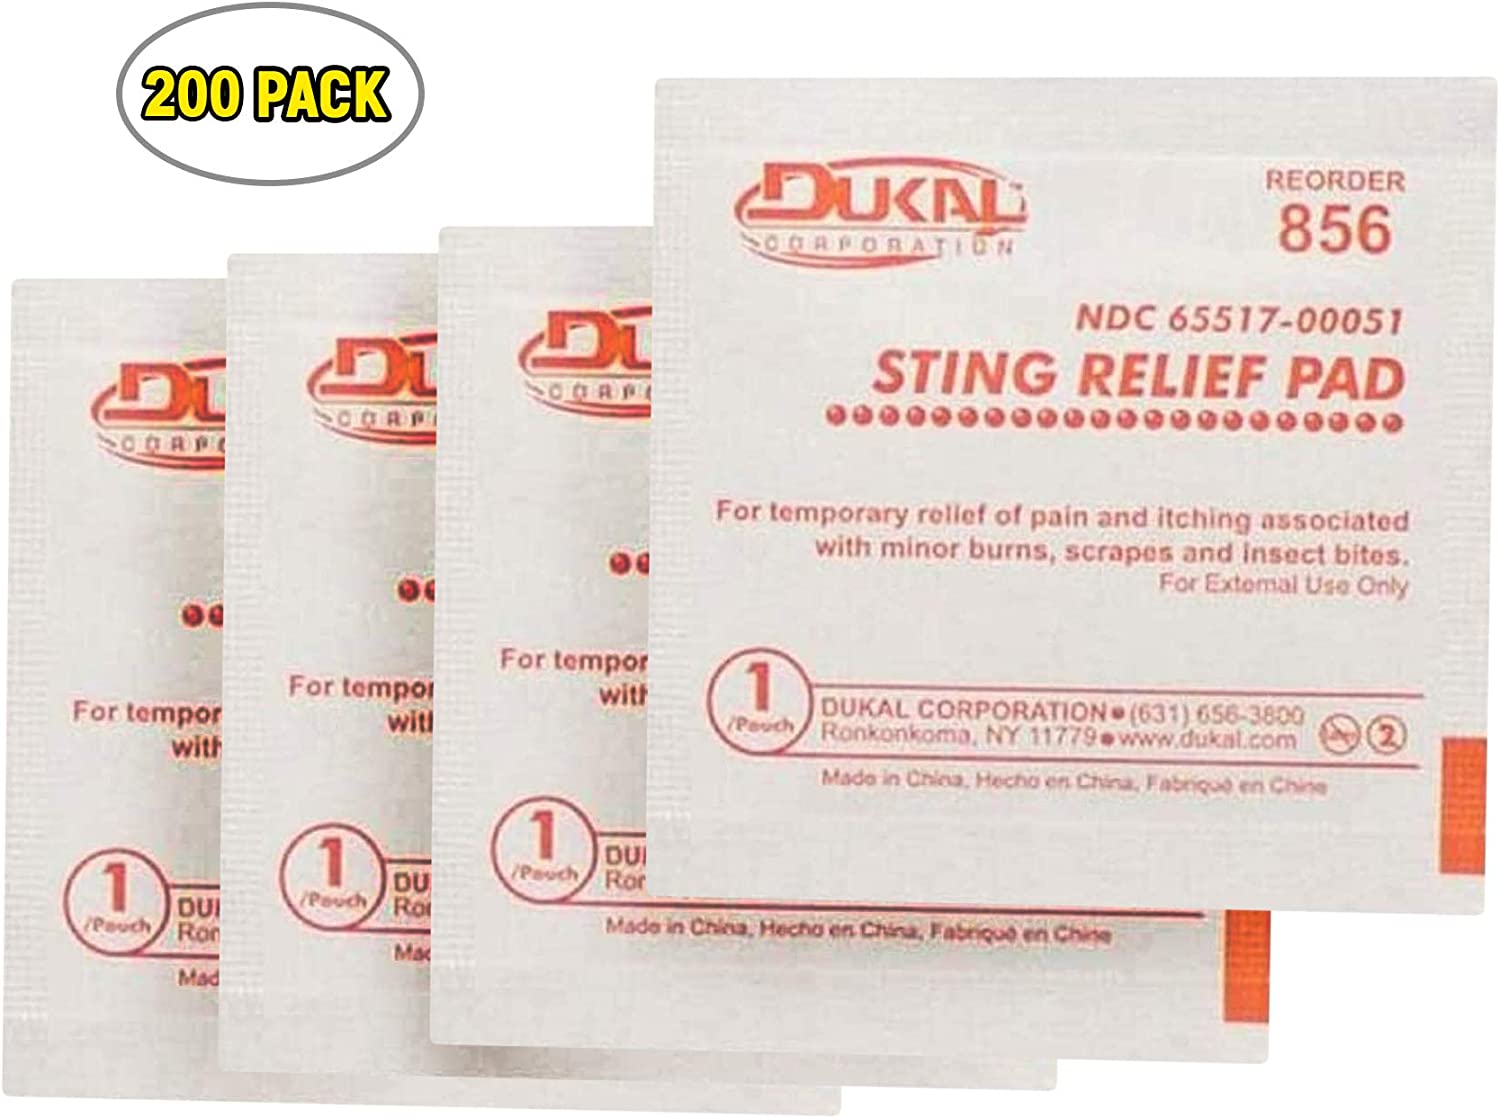 Dukal White Cotton Roll. Roll of Non-Sterile Cotton for Wound Care. Soft and Absorbent, 100% Cotton. Re-Sealable Drawstring Polybag. White, Single